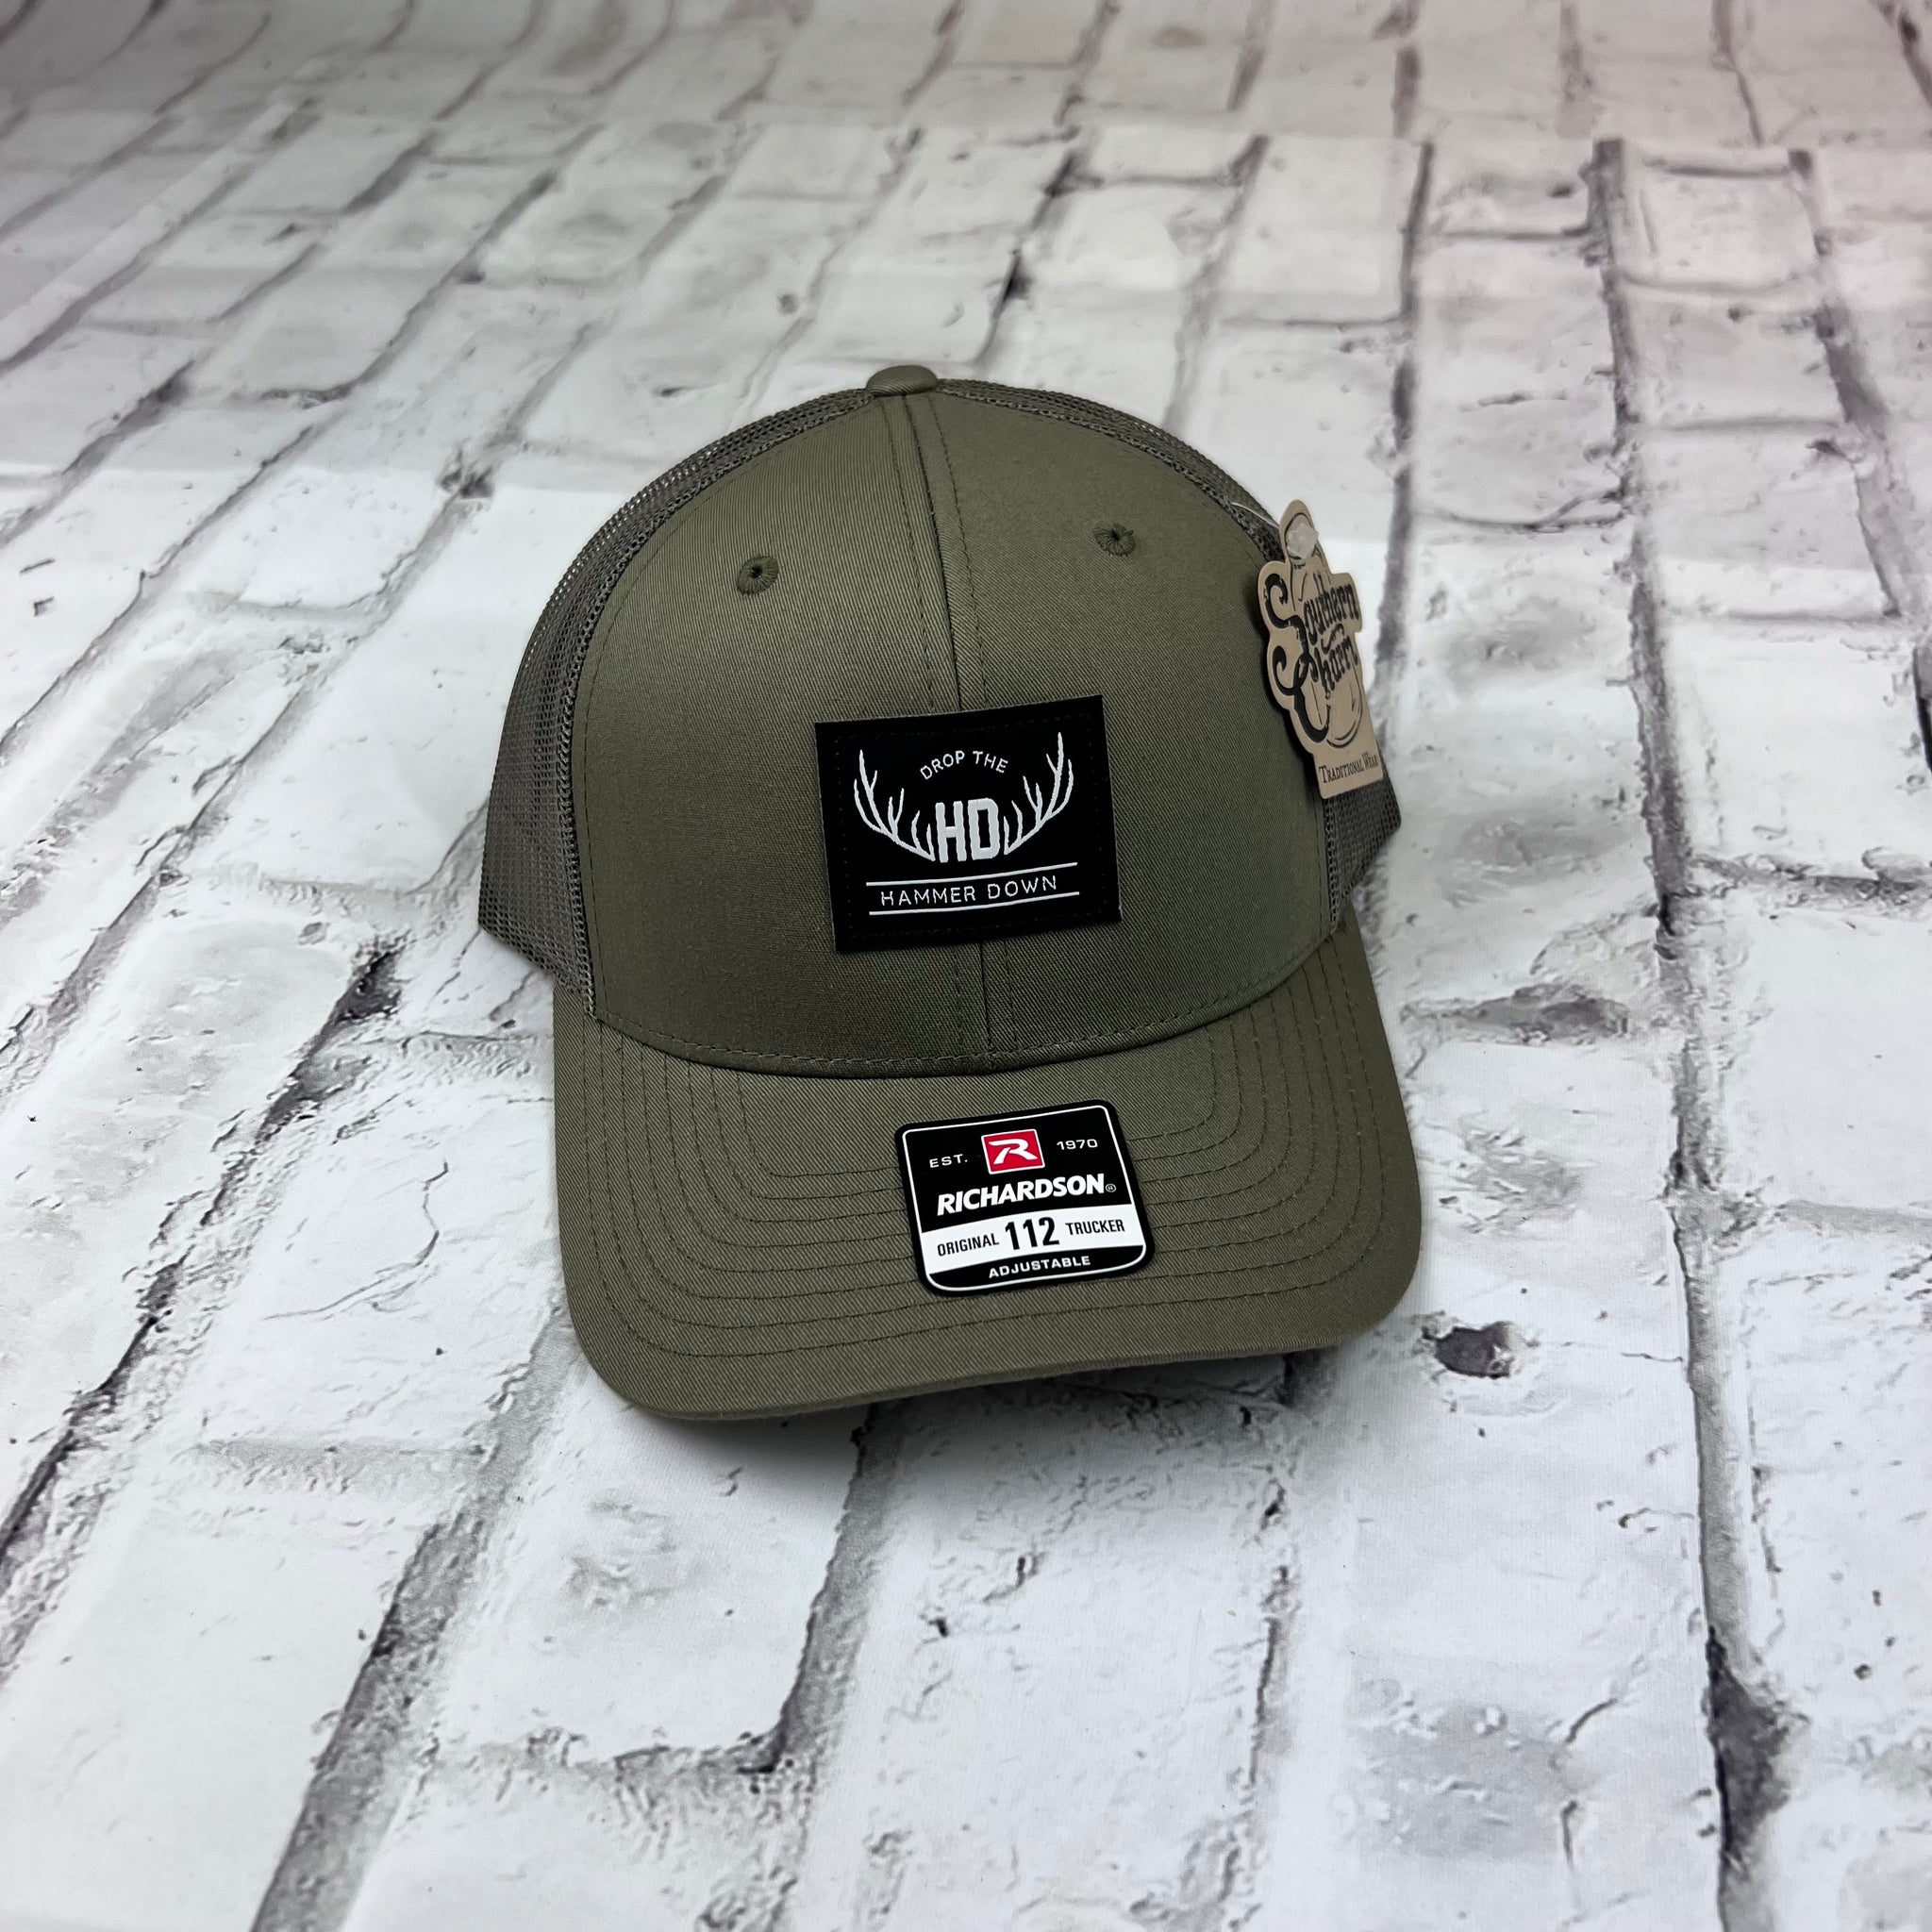 Hammer Down "HD Antler" Hat - Loden with Leather Patch